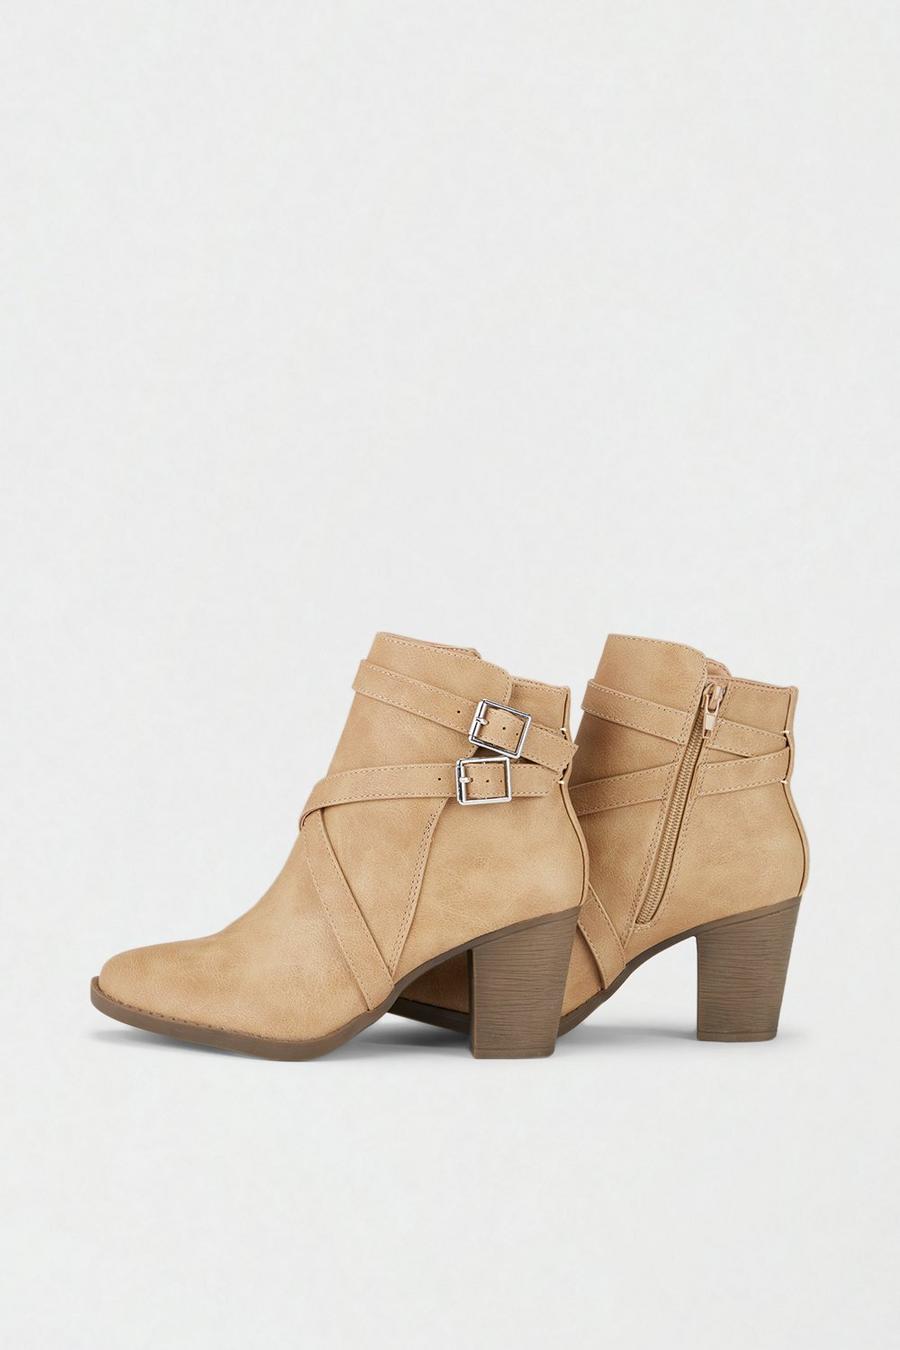 Alisha Cross Over Strap Ankle Boots